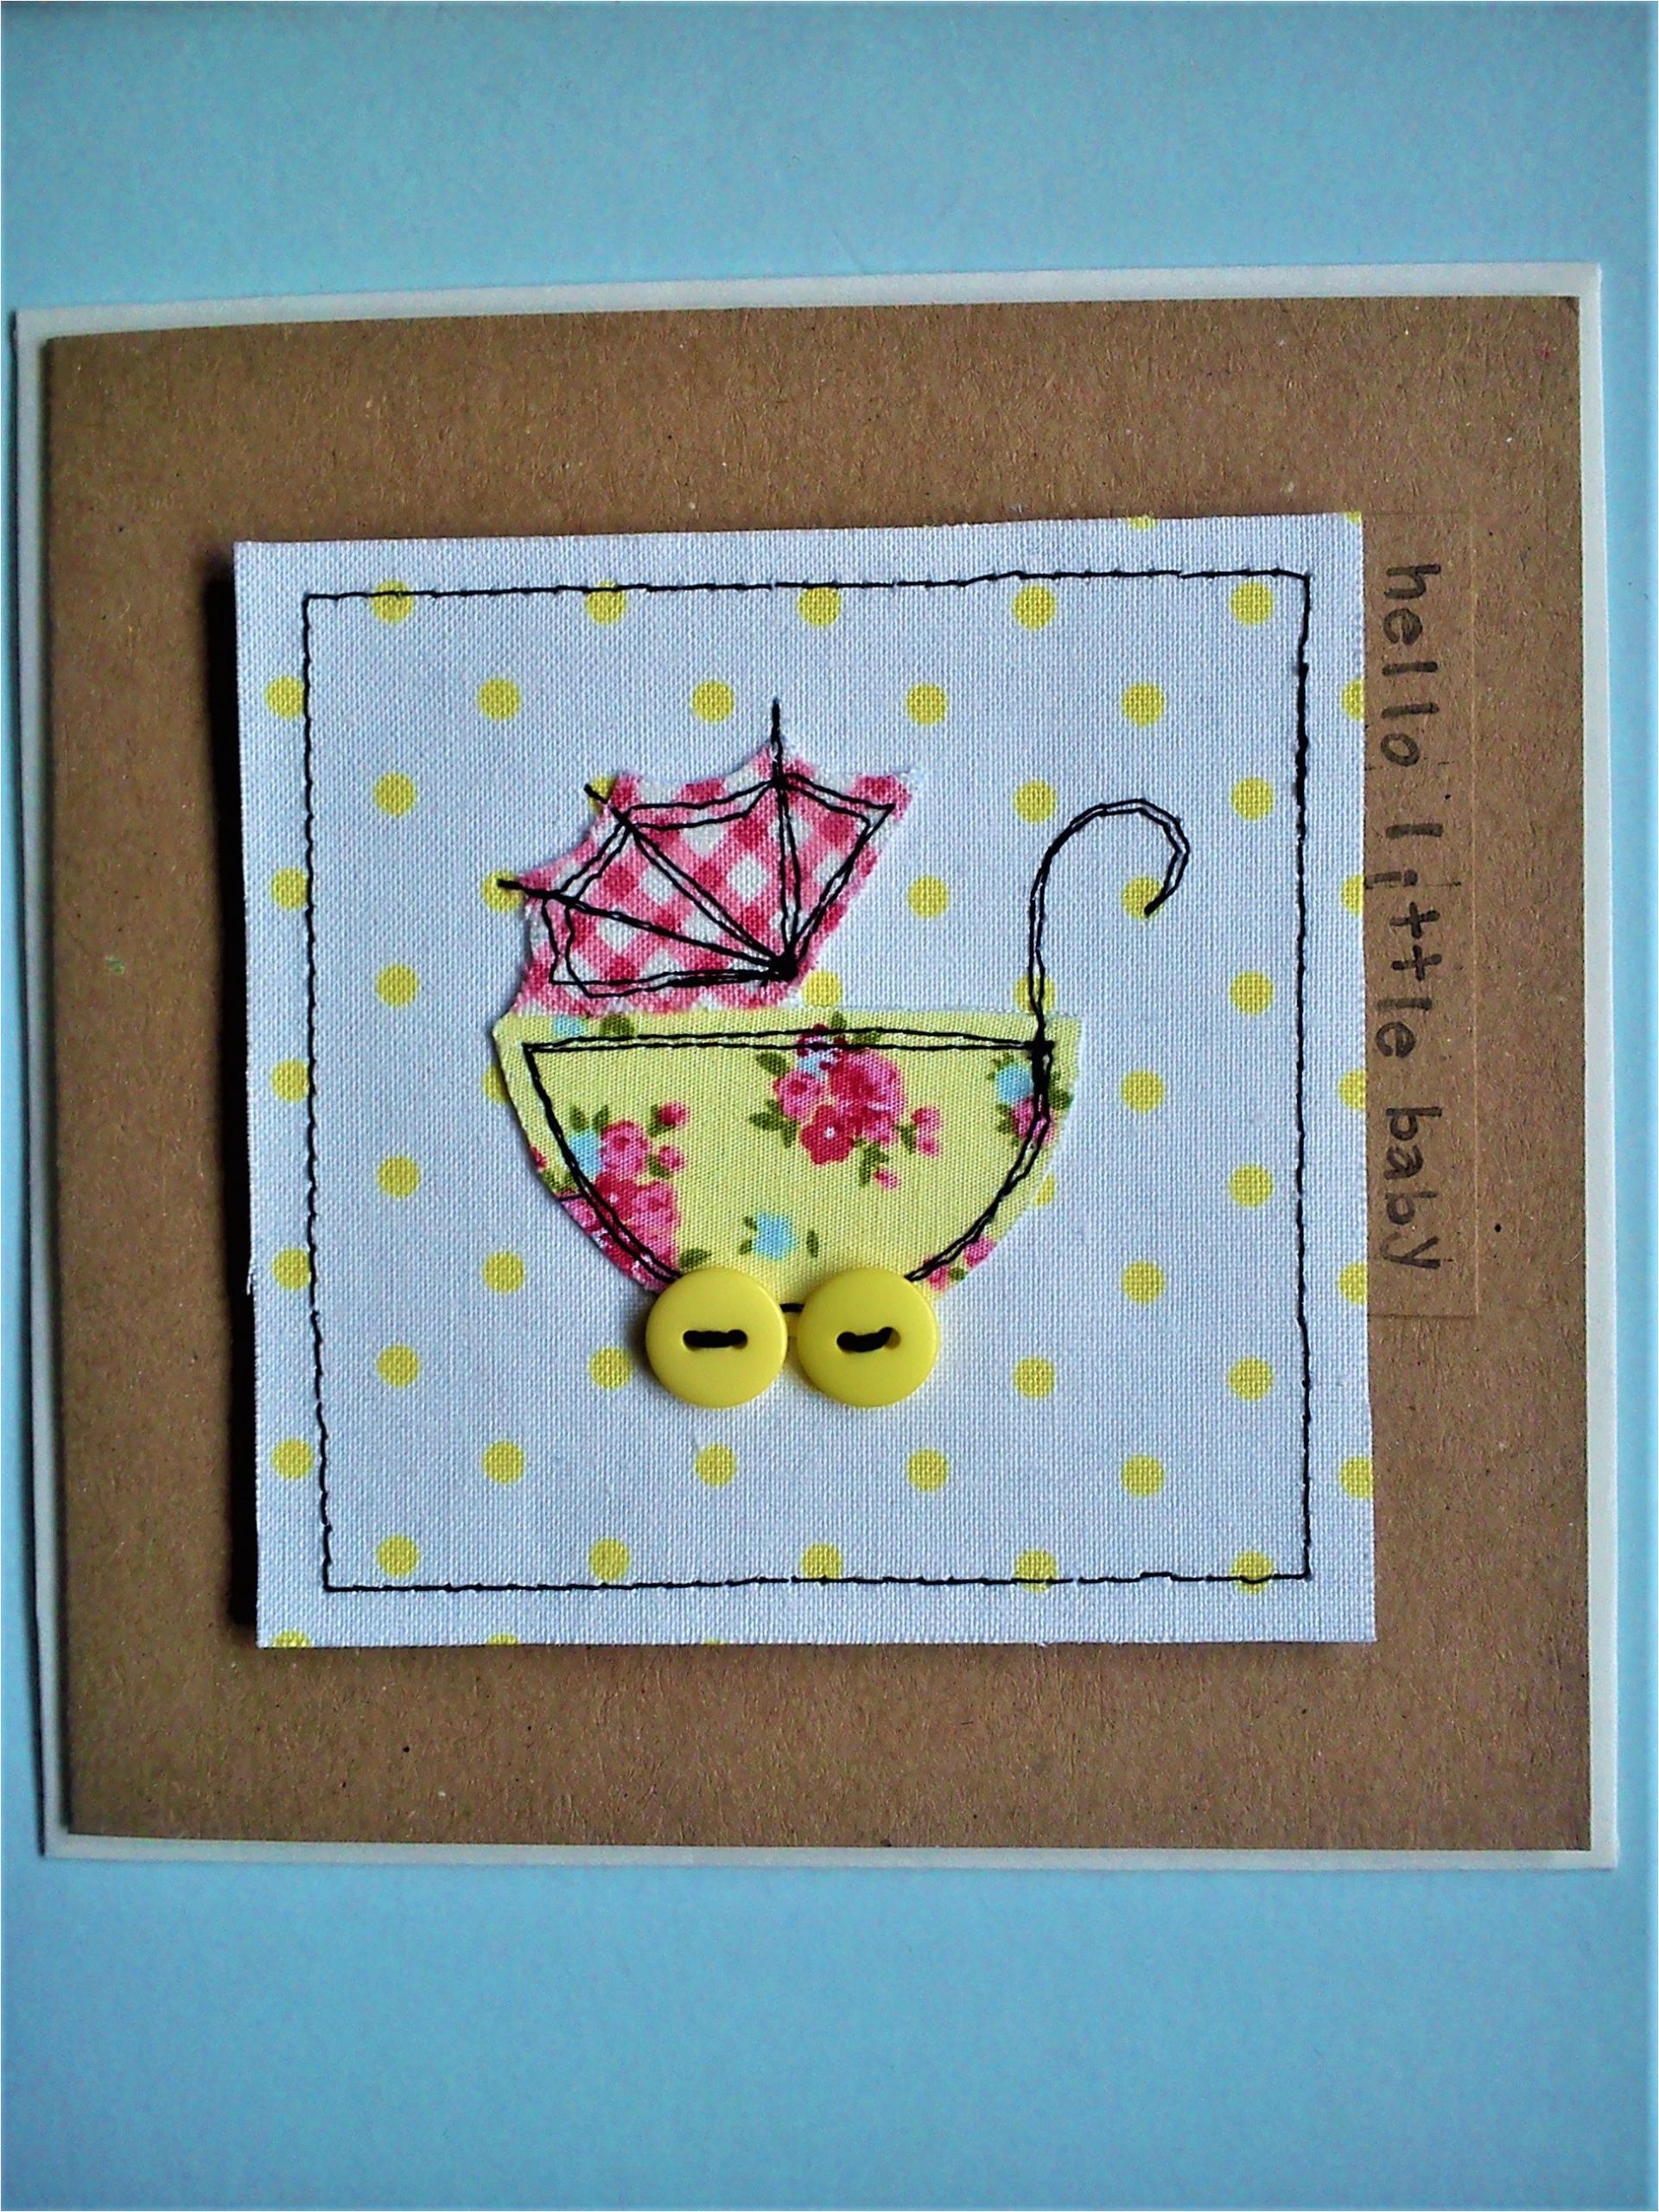 Handmade Card for A Baby Handmade Sewn New Baby Card Made with Pretty Fabrics and